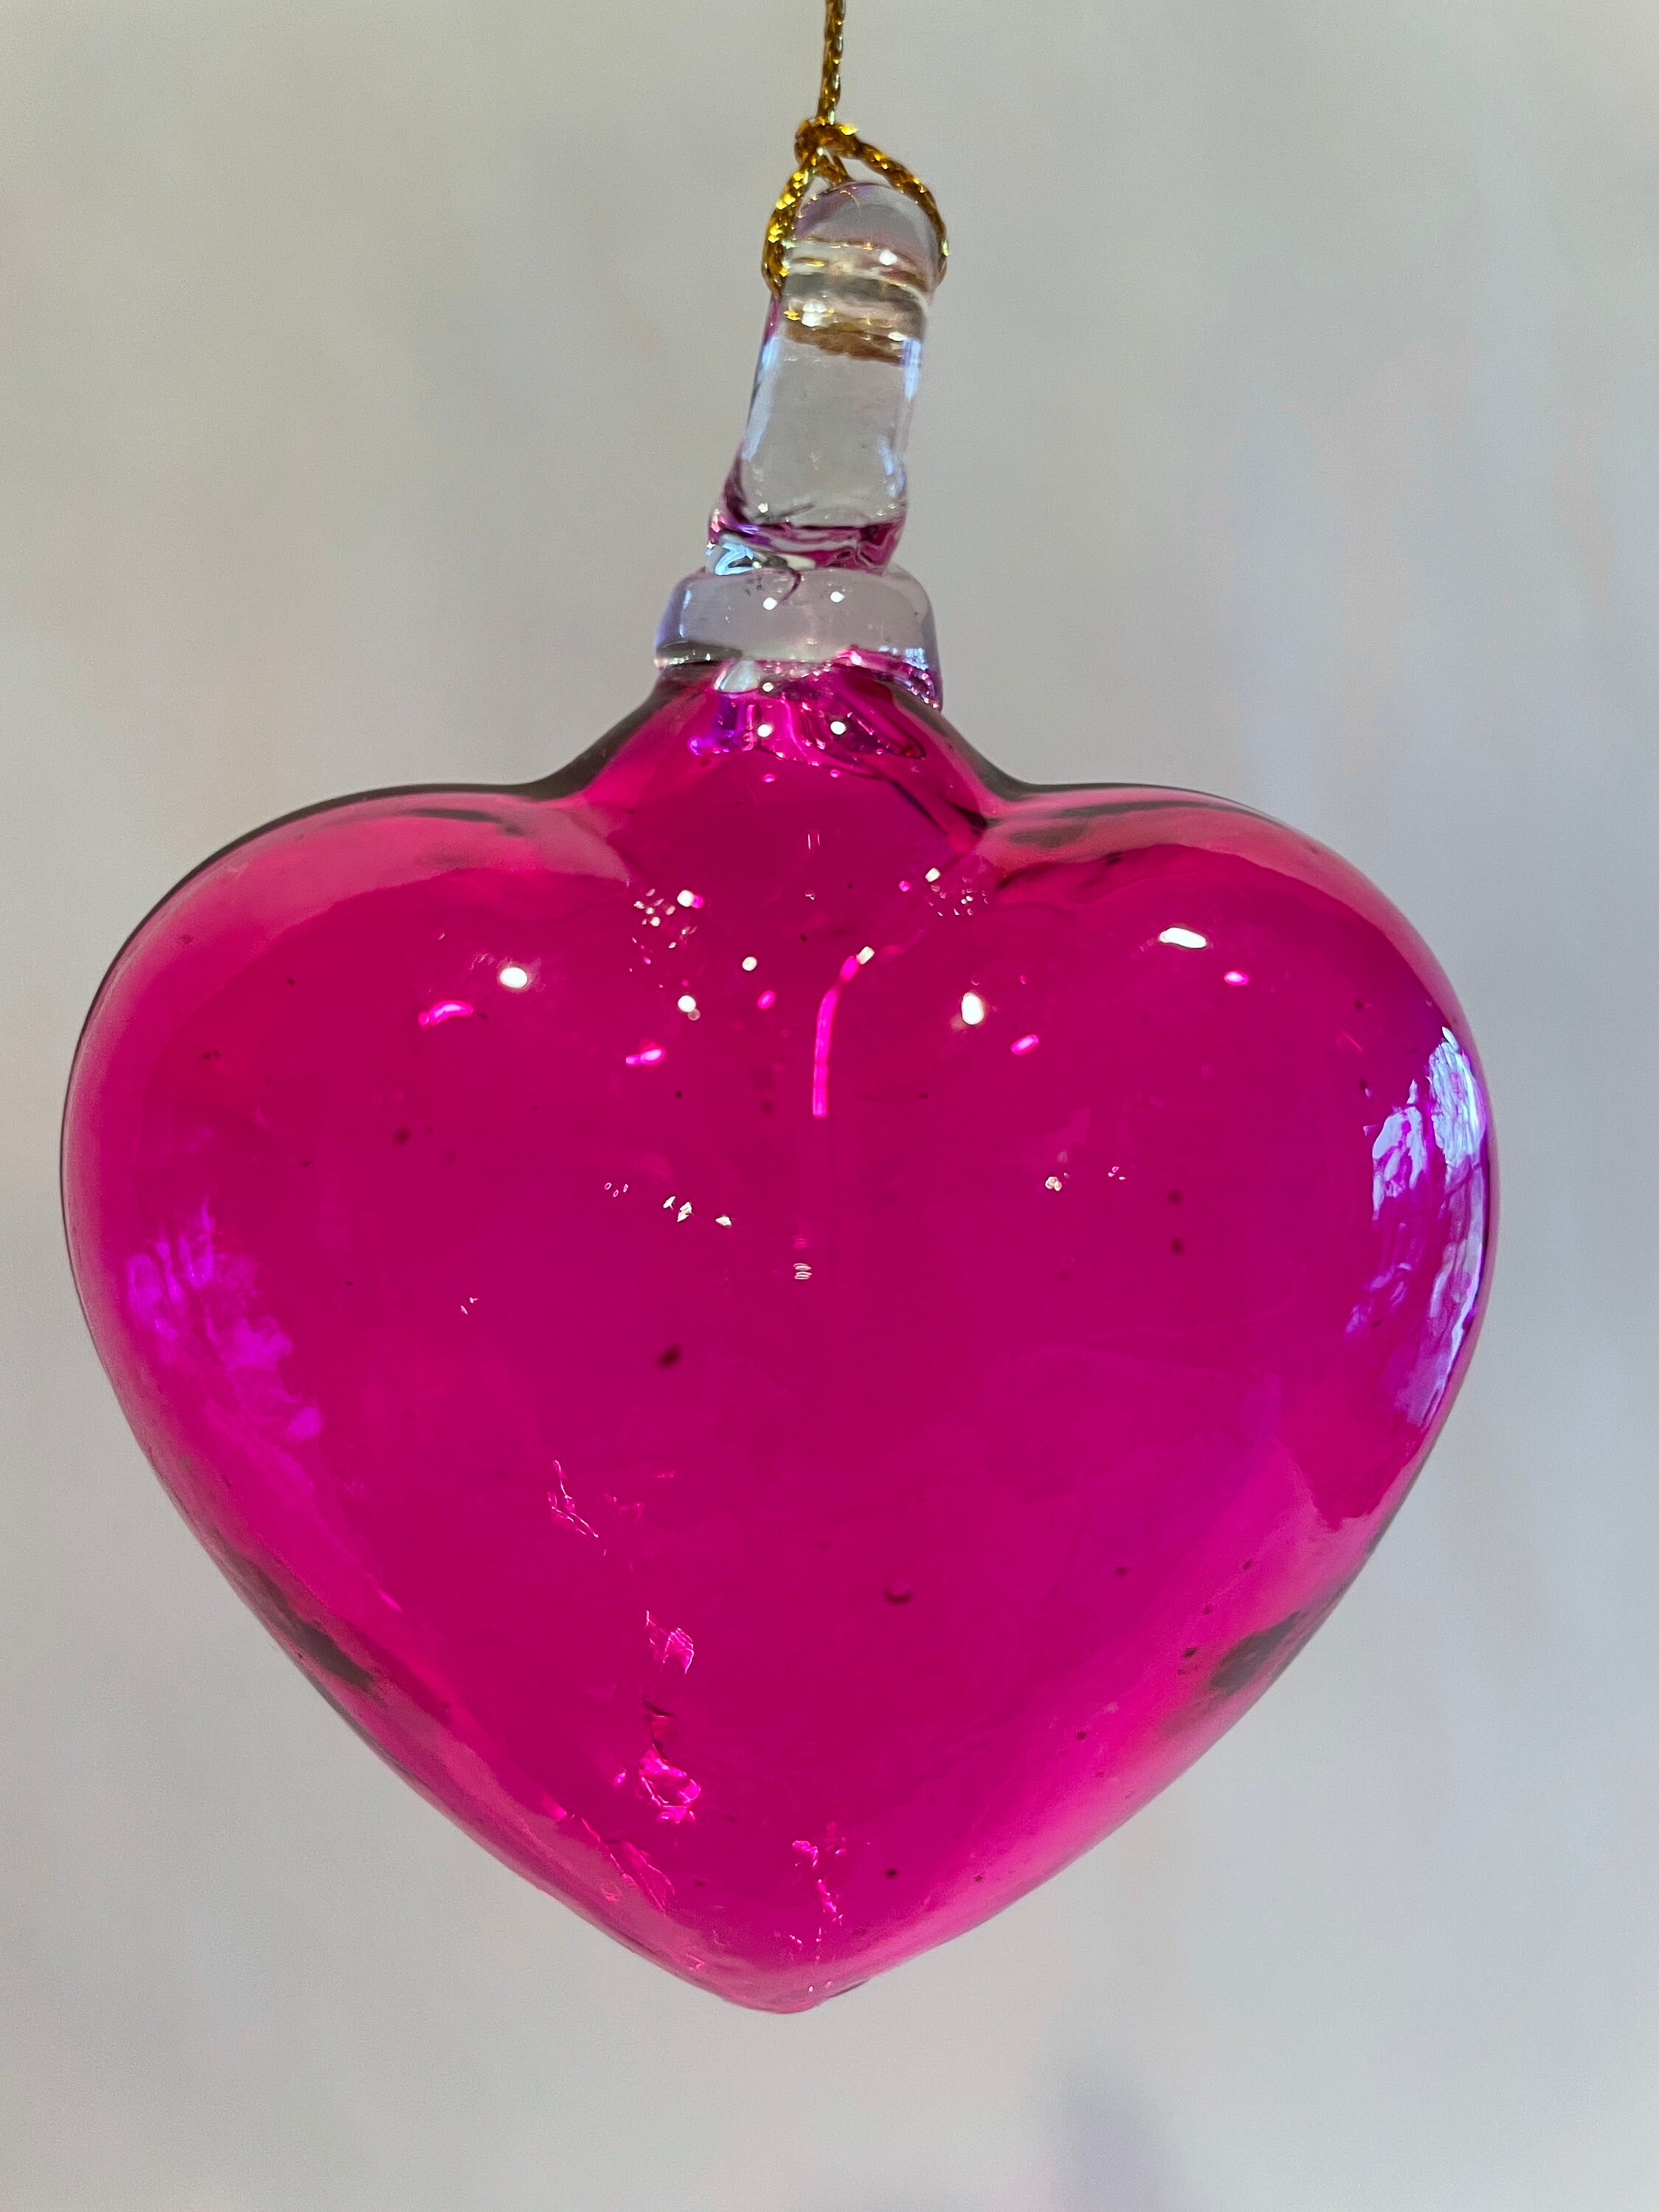 Singles or Case Packs Blown Glass Heart Ornaments 